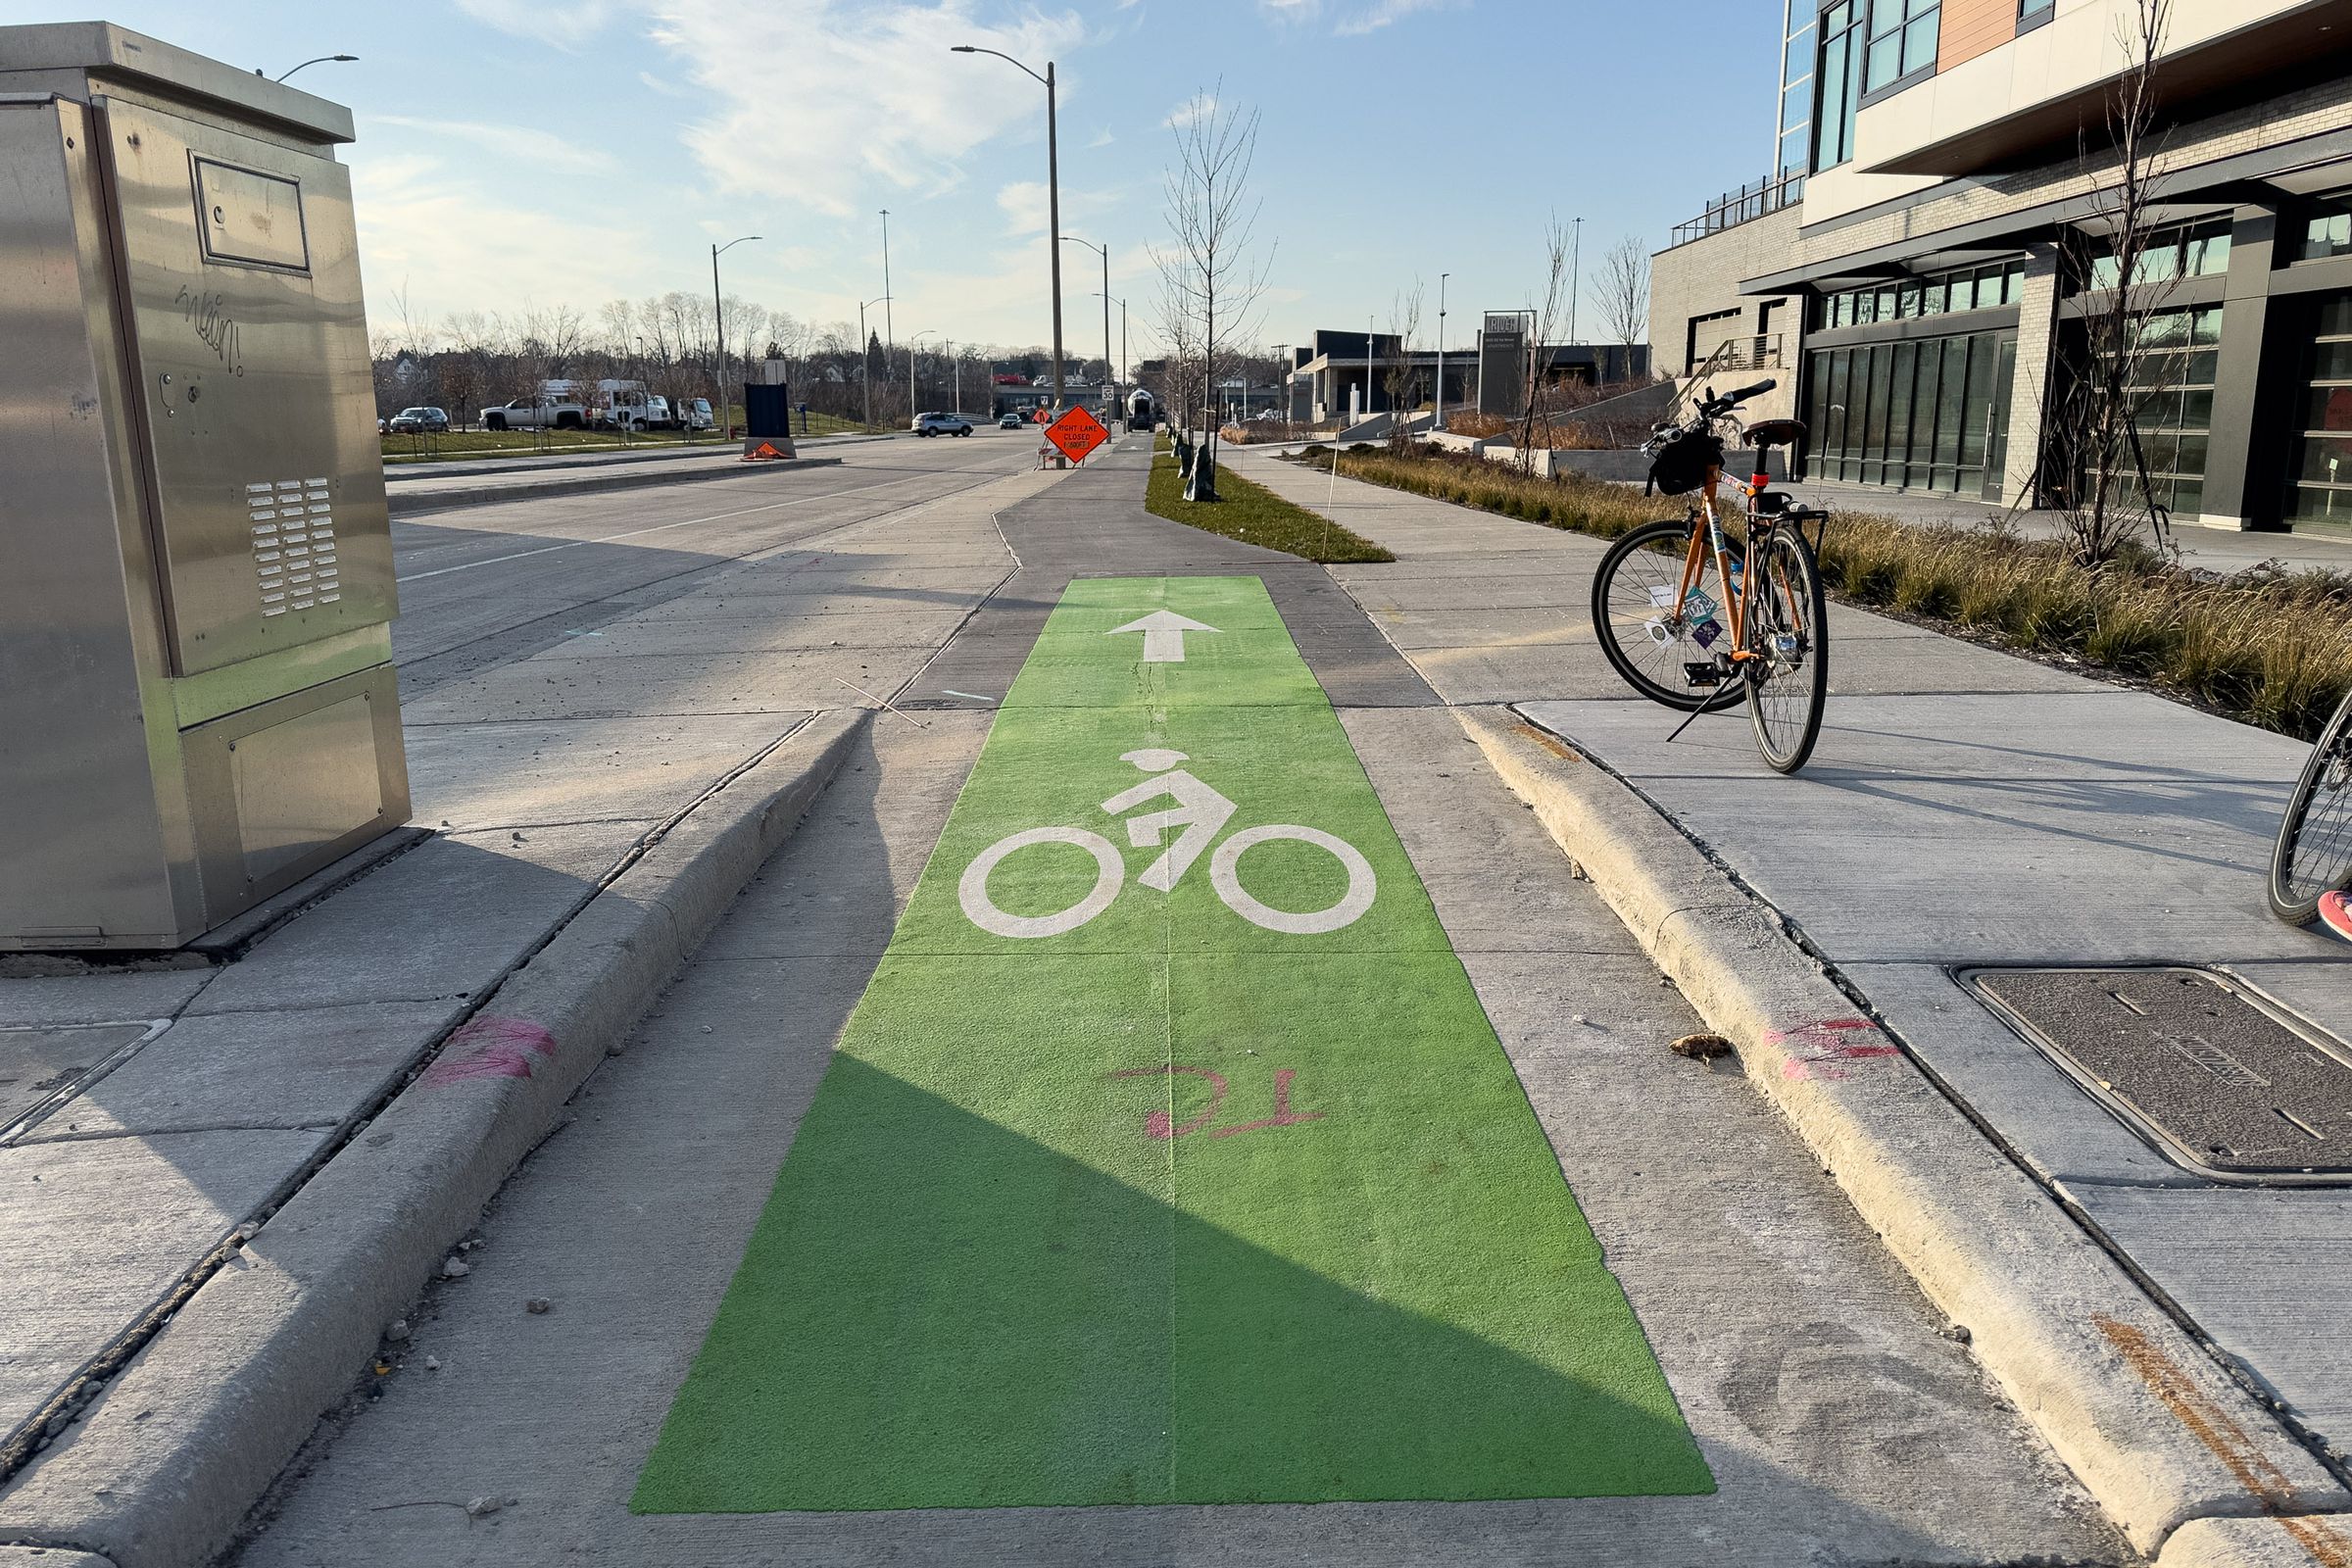 A picture of green paint indicates that a portion of this sidewalk is intended for cyclists only.